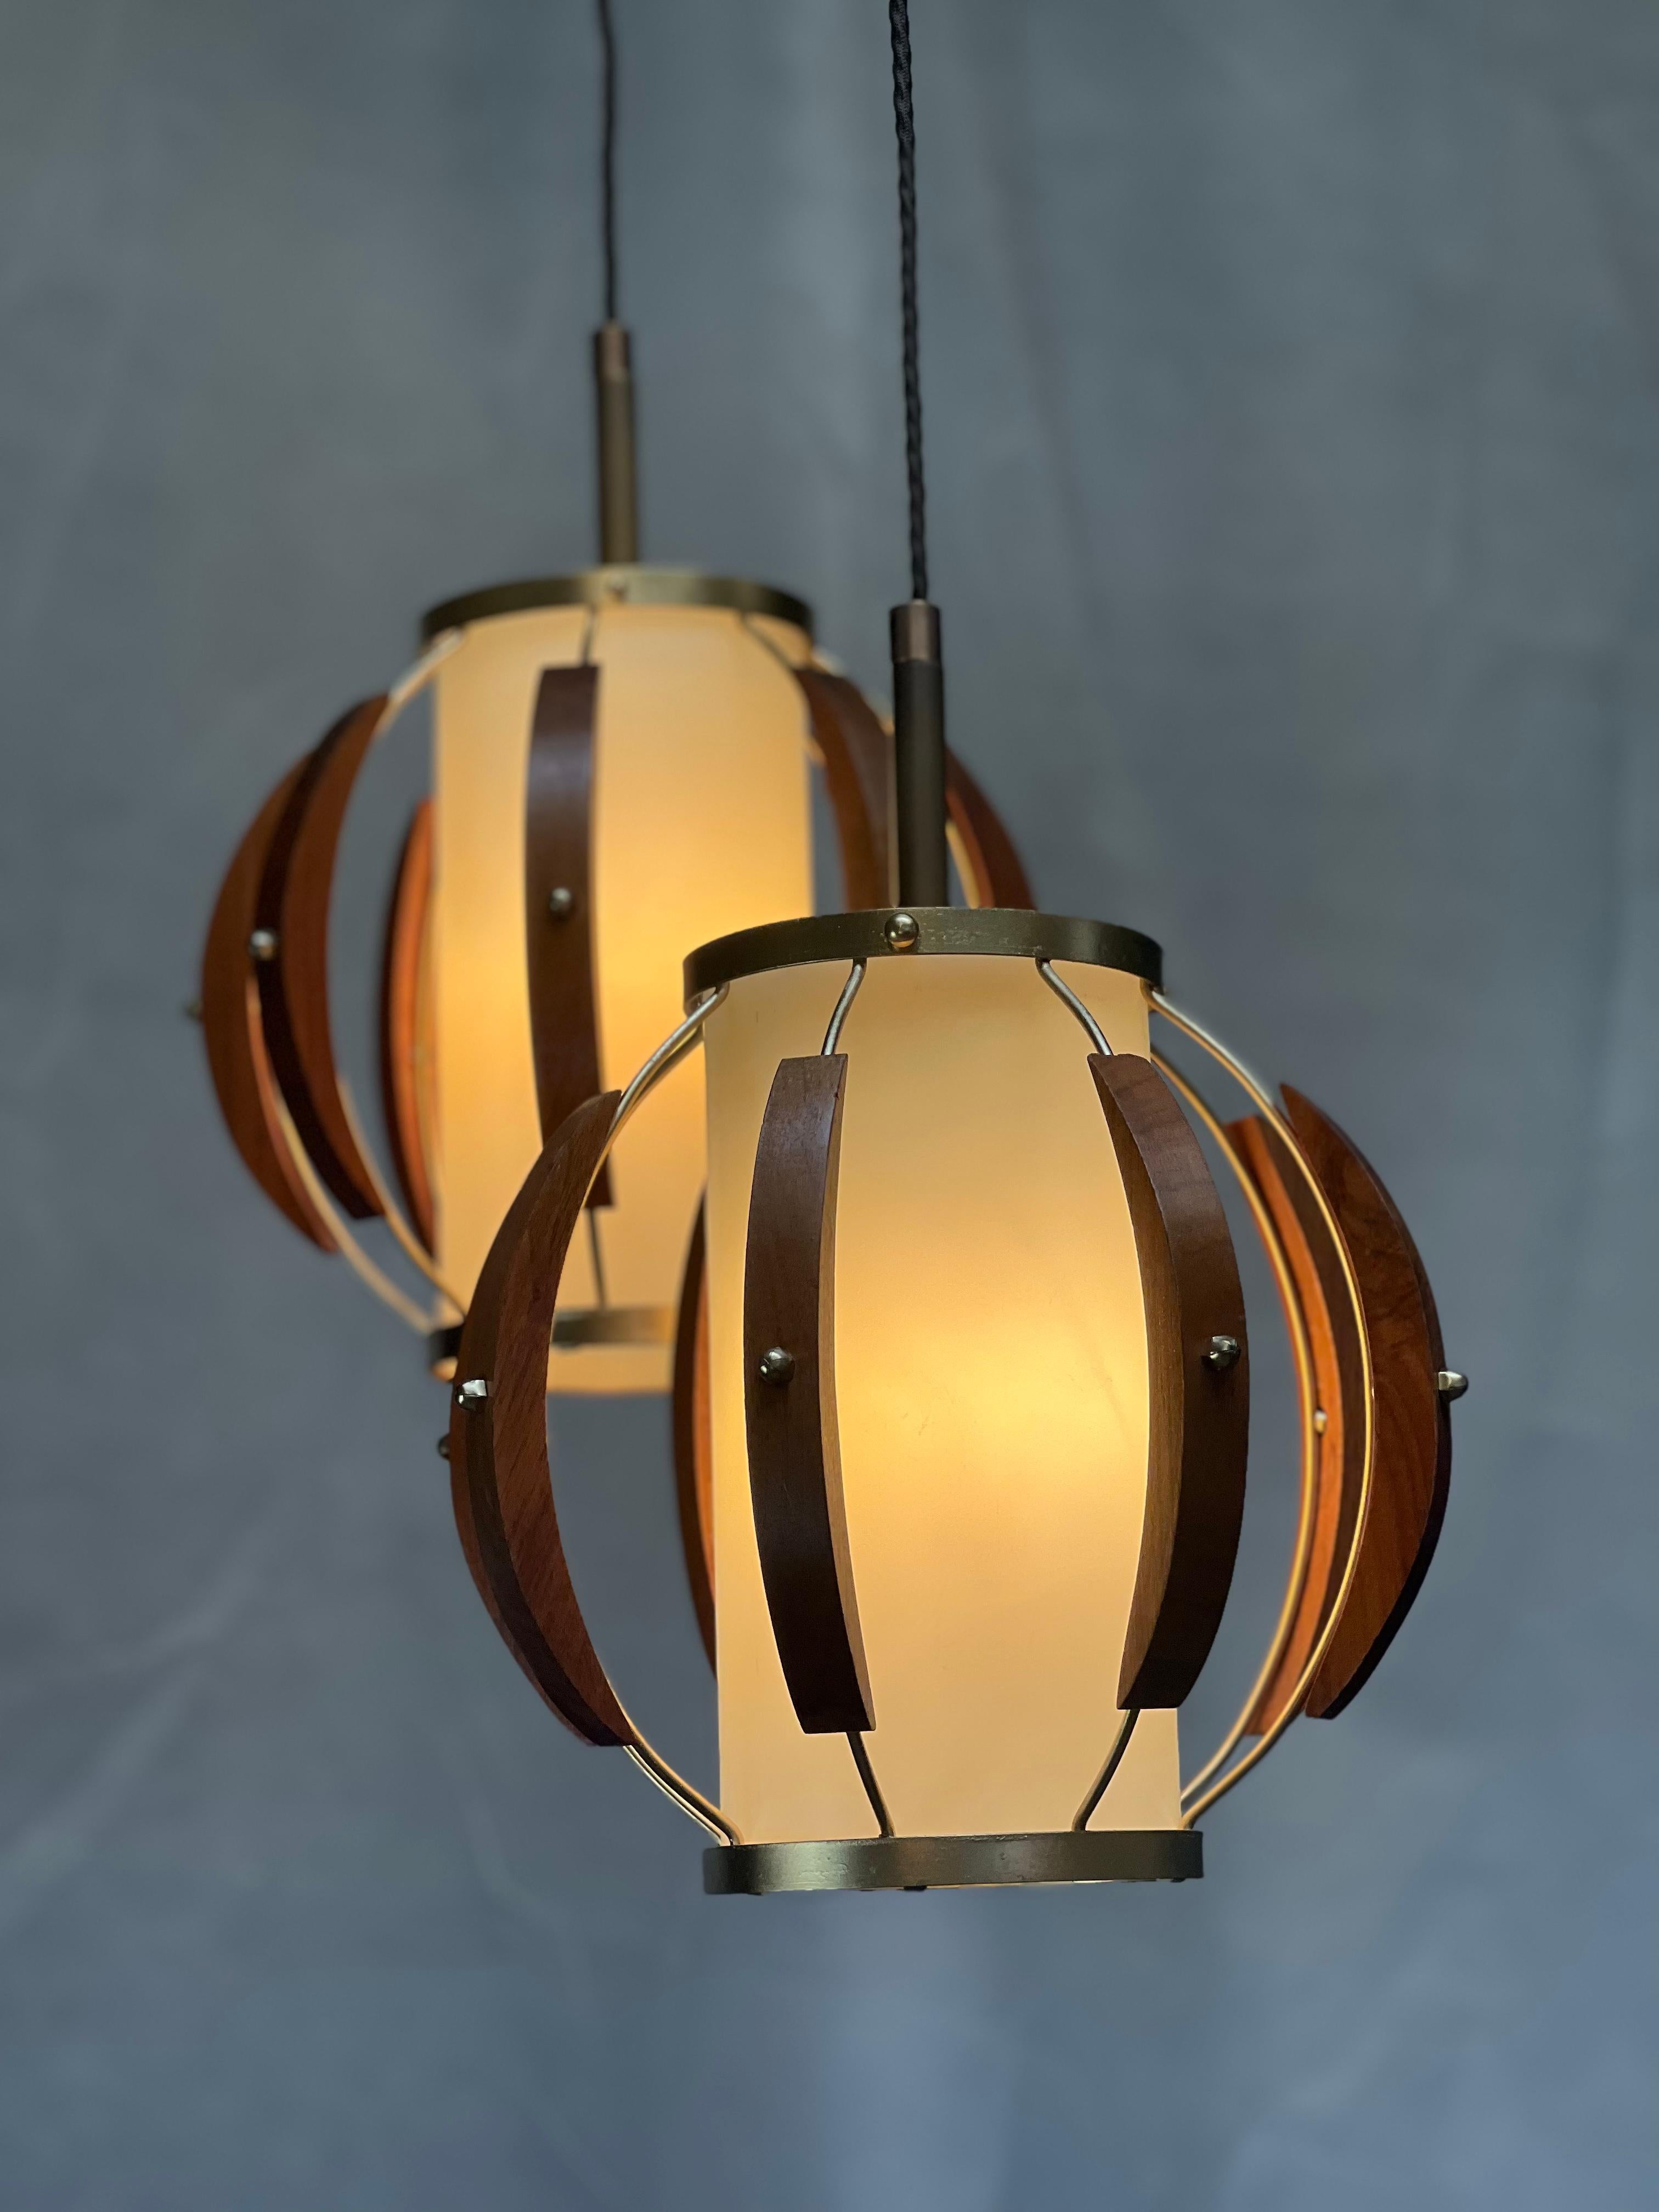 Stunning original pair of MCM, Mid-Century Modern pendant lights that have been fully rewired, tip to toe, with UL certified parts by a restoration specialist. Your restaurant has an electrical inspector? These will pass with flying colors.
Wood is